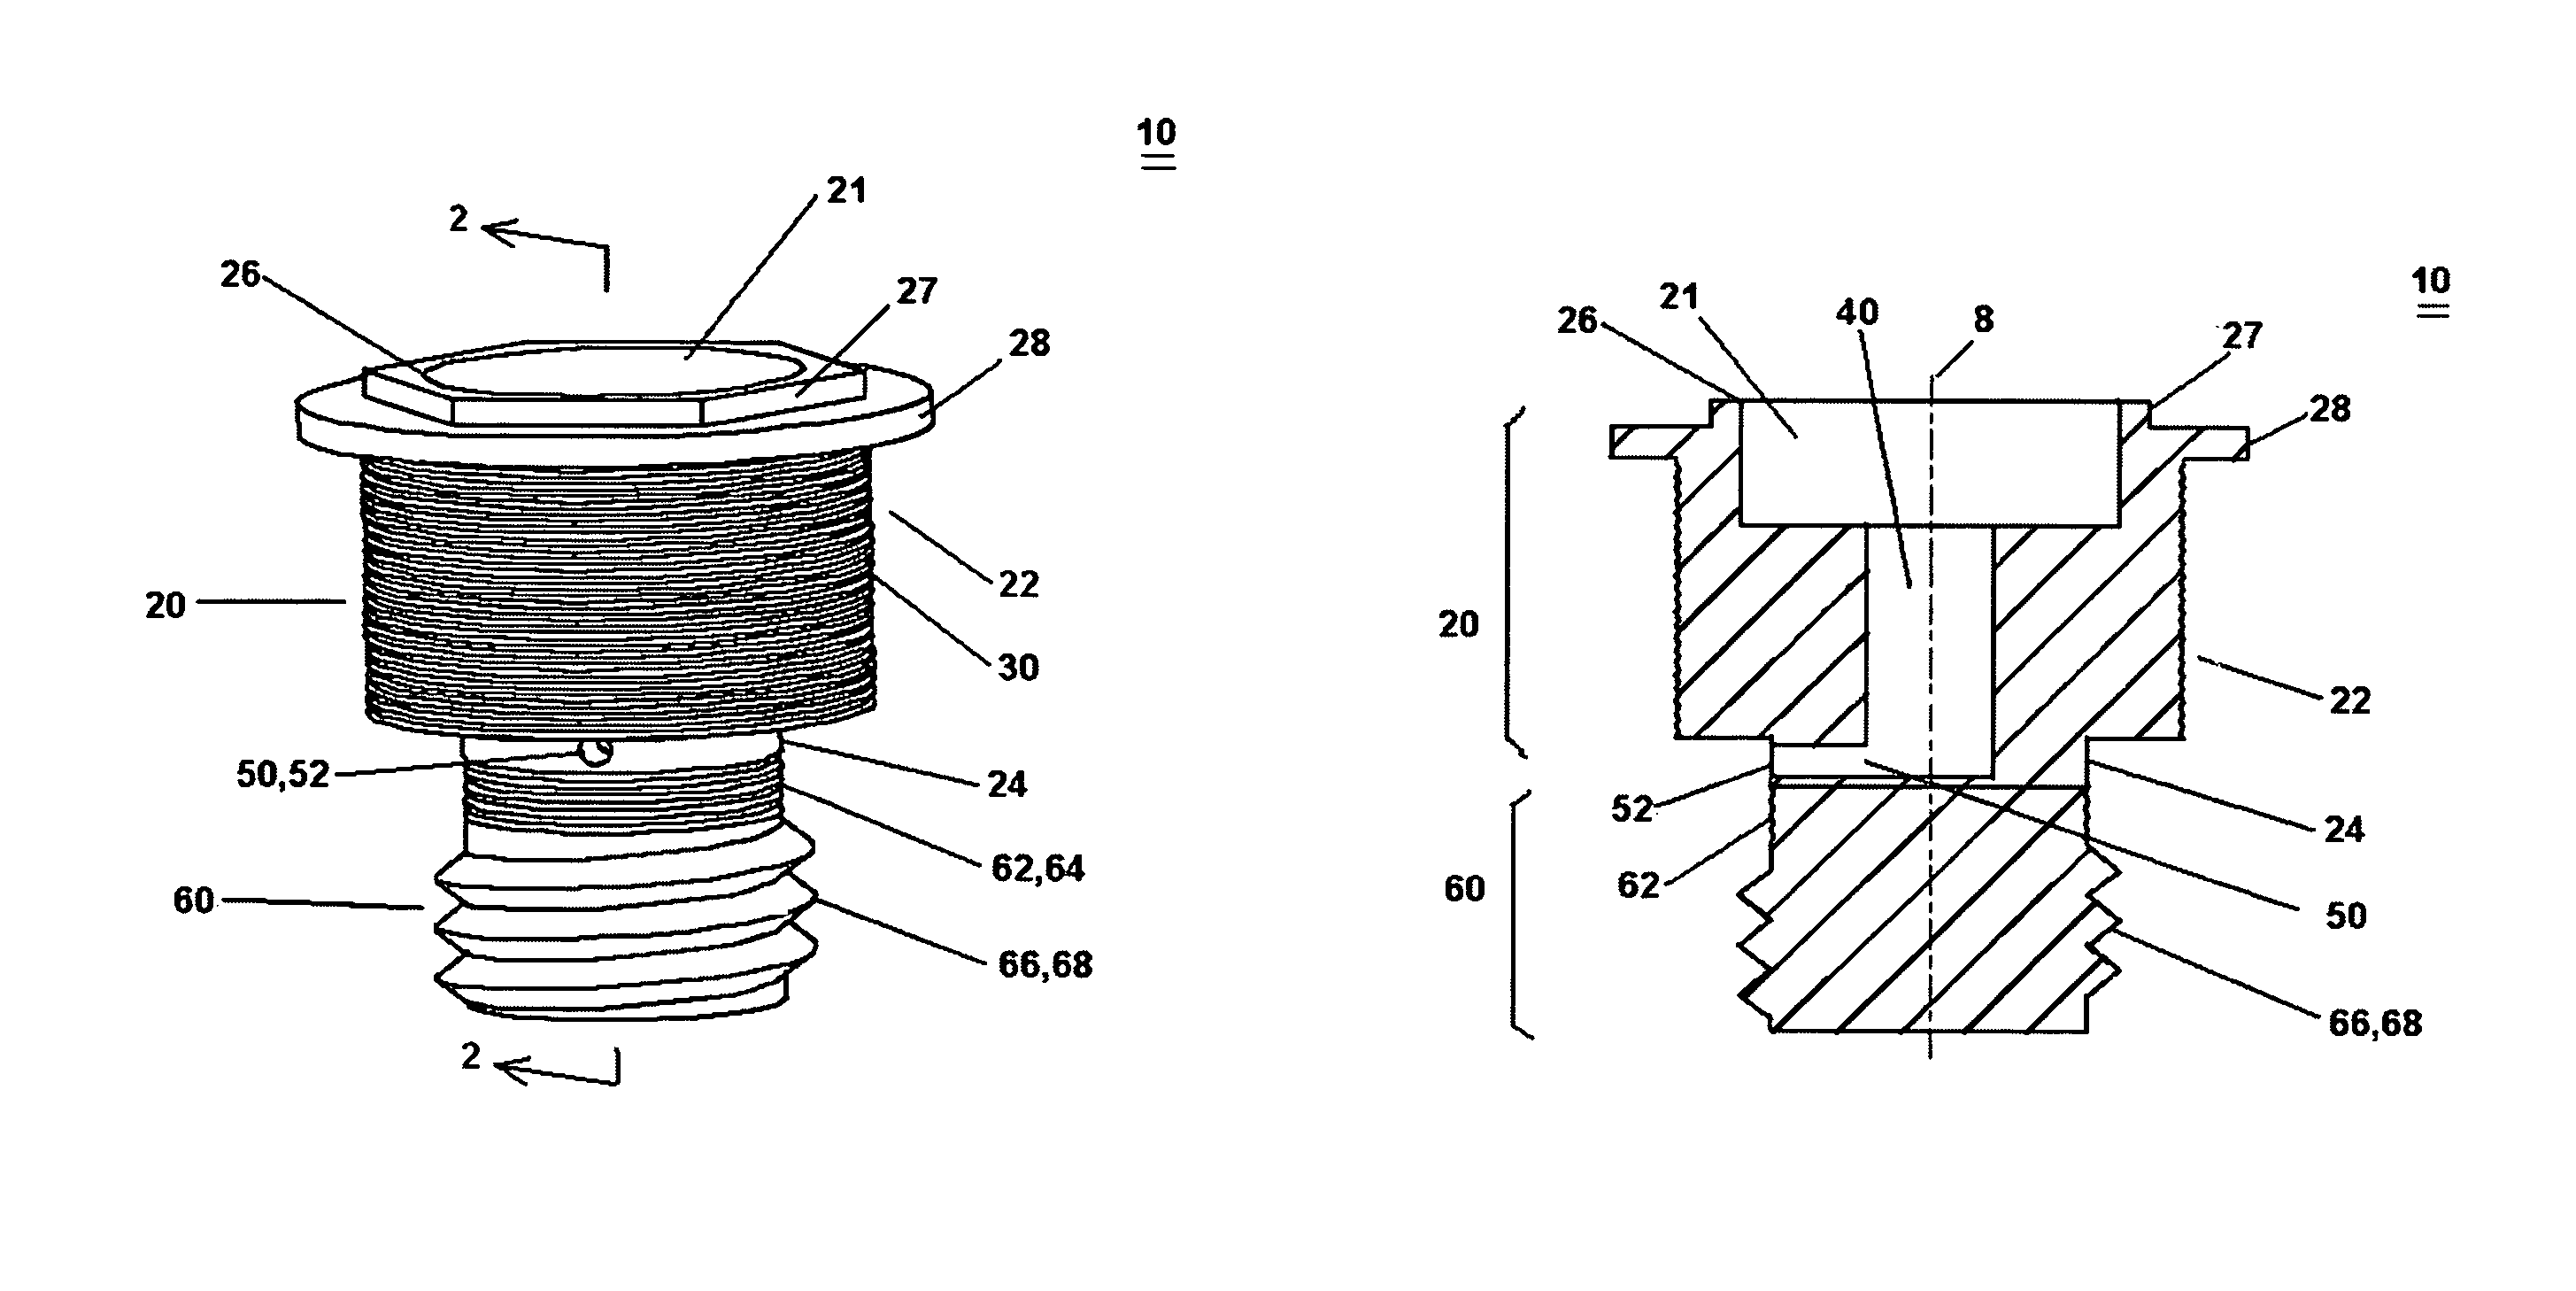 Transcutaneous port having micro-textured surfaces for tissue and bone integration